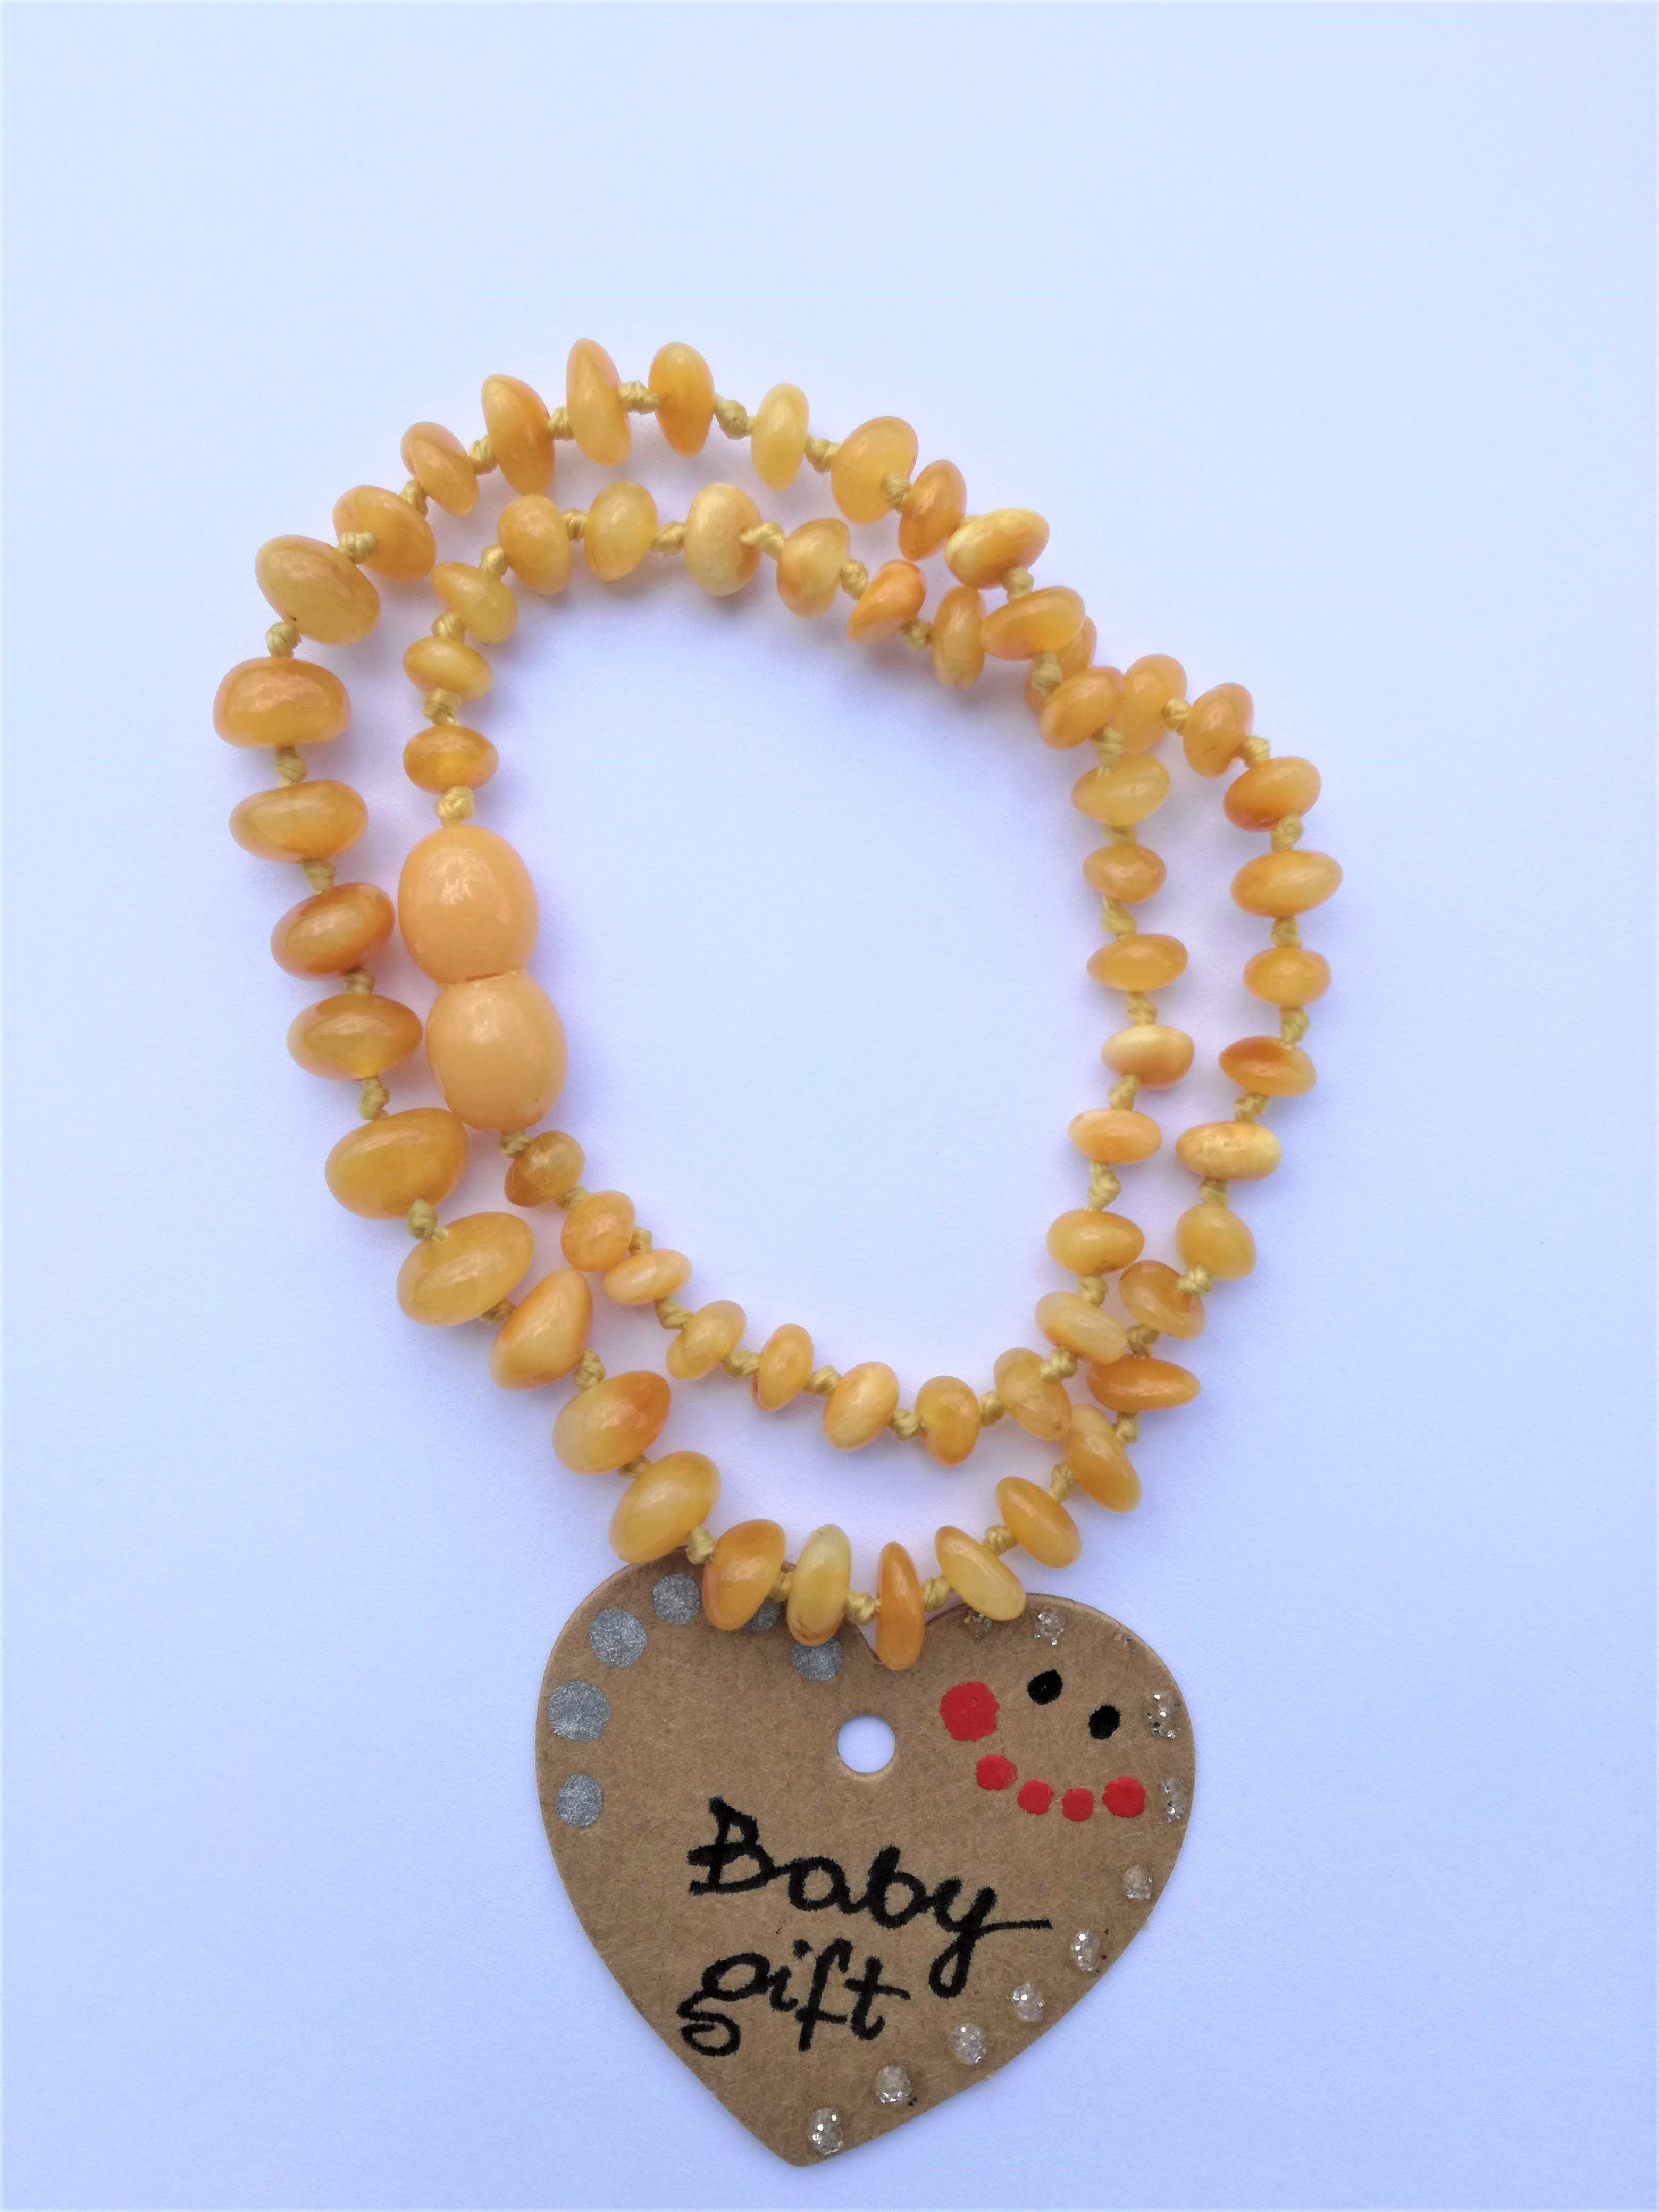 amber teething necklace, antiqued polished beads, premium product, limited edition, plastic screw clasp, healing, succinic acid, genuine baltic amber, safe for babies and nursing mums, made in poland